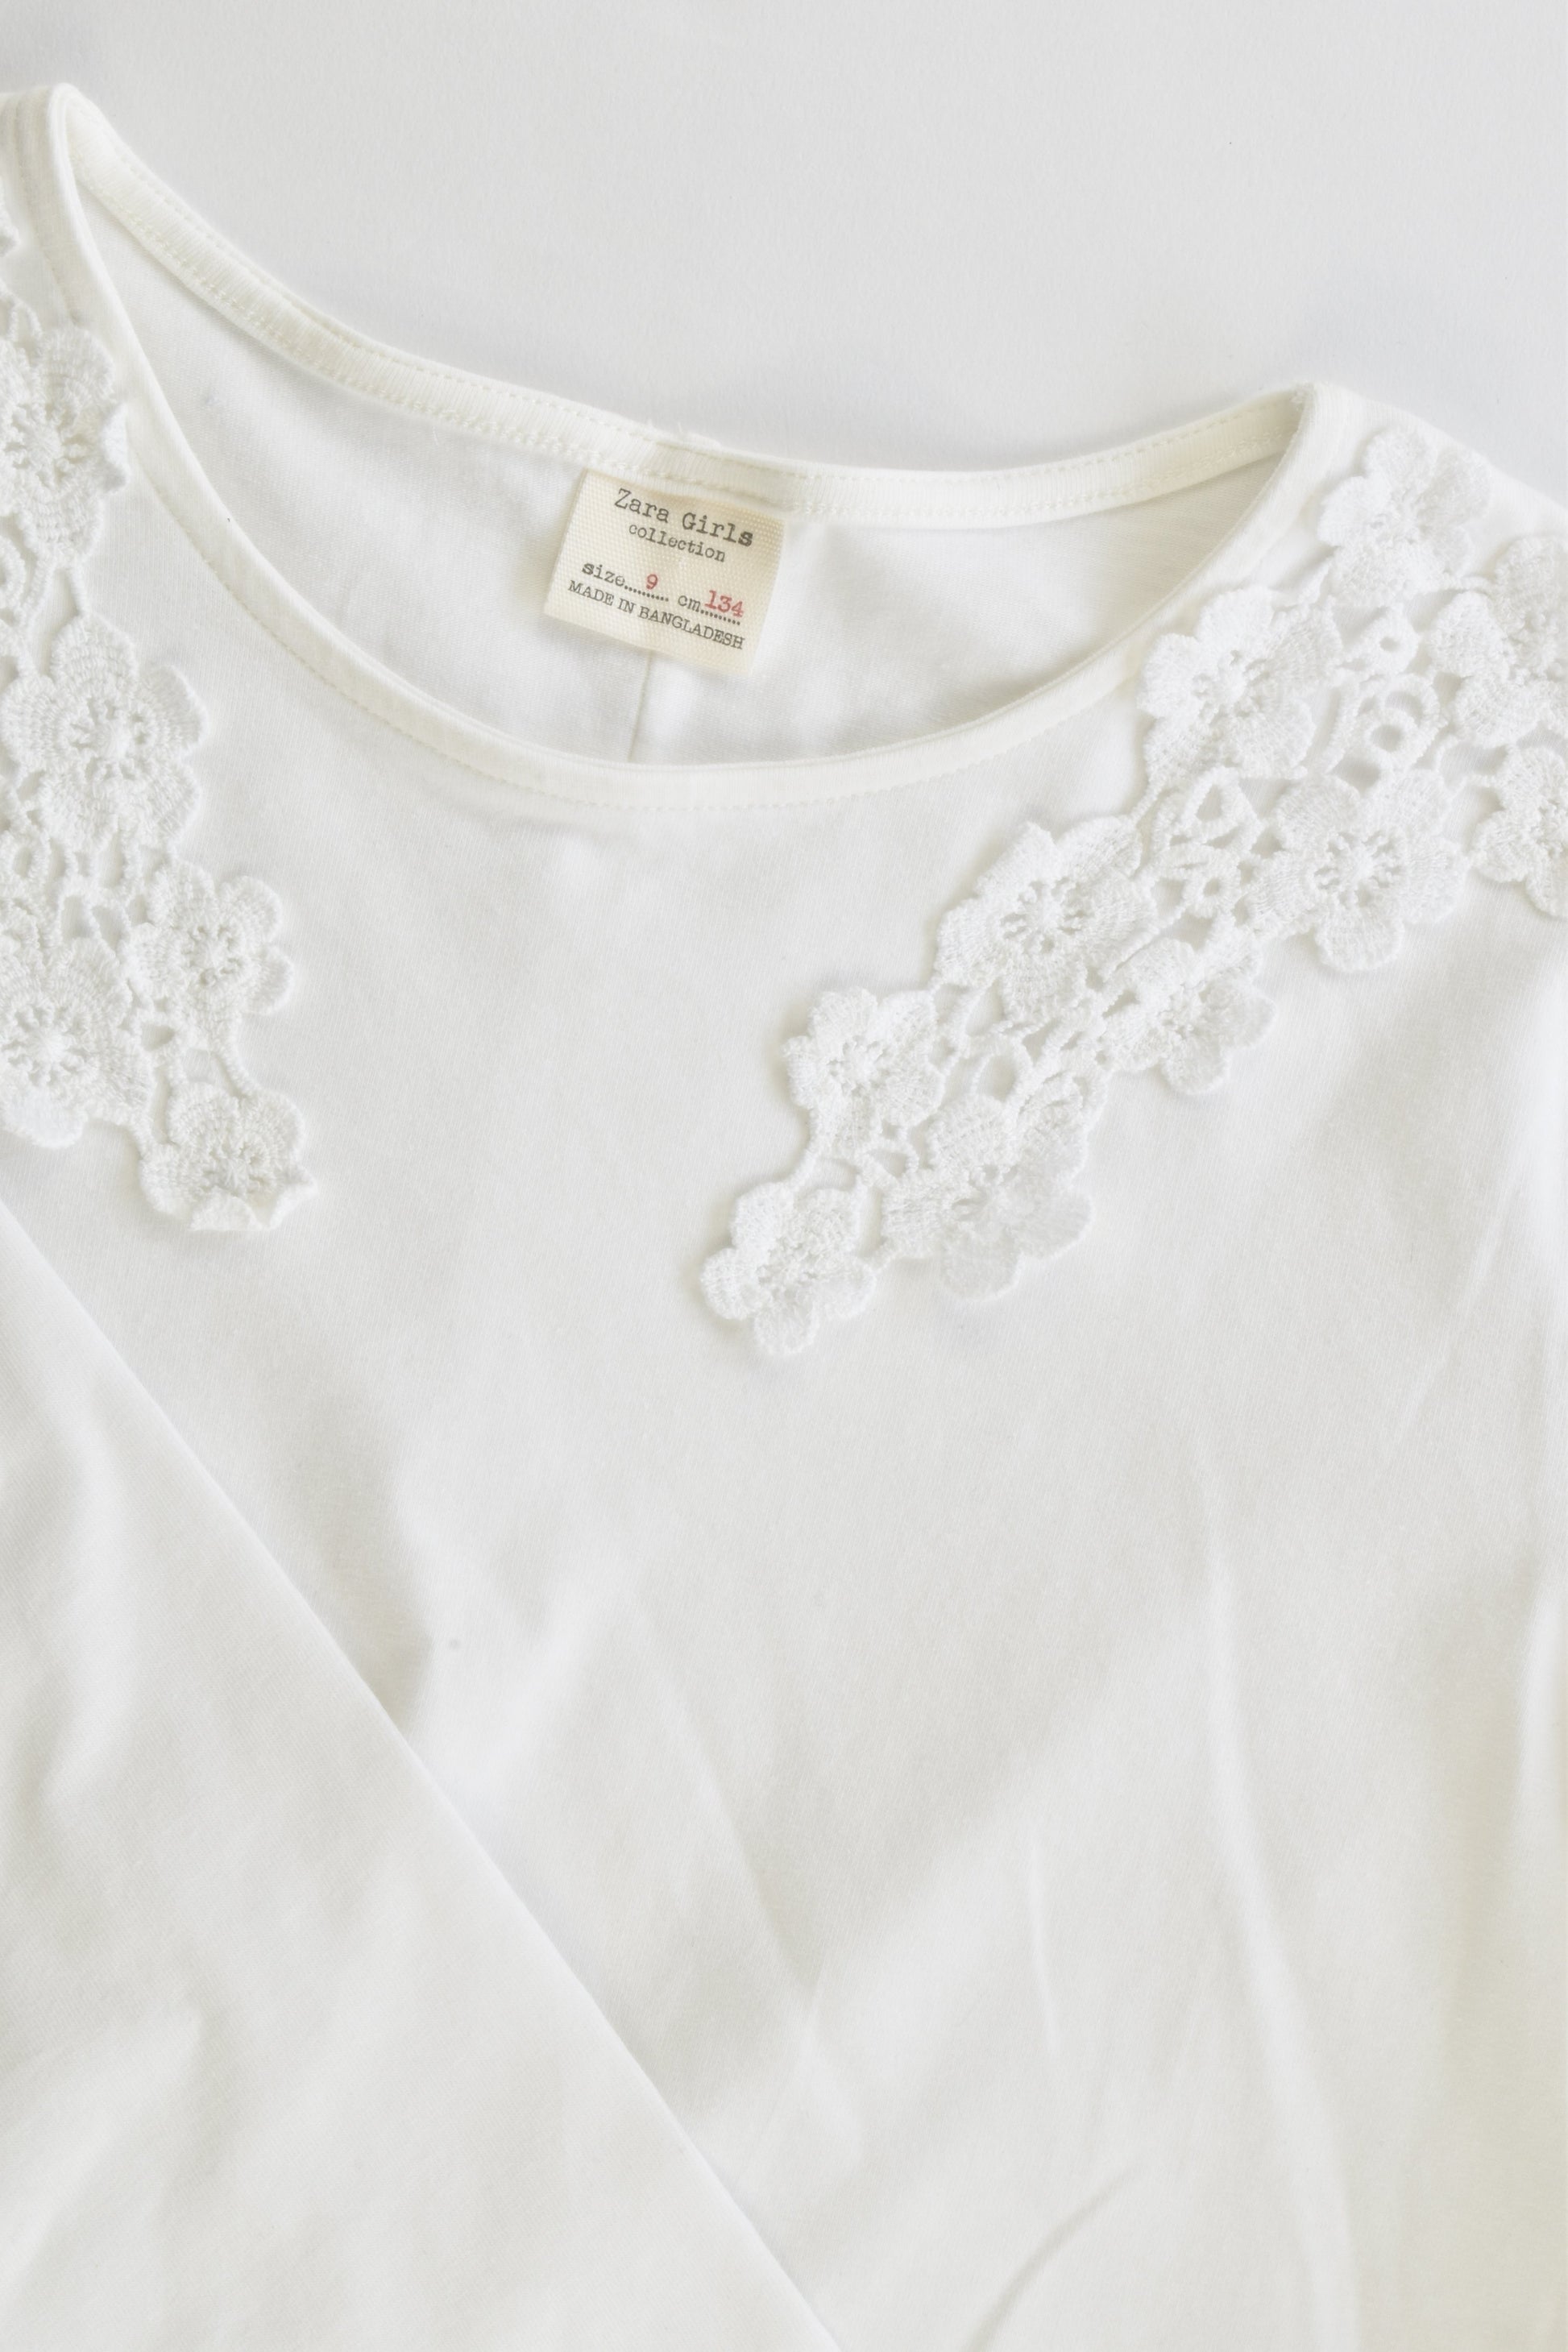 Zara Size 9 (134 cm) Top with Lace Details